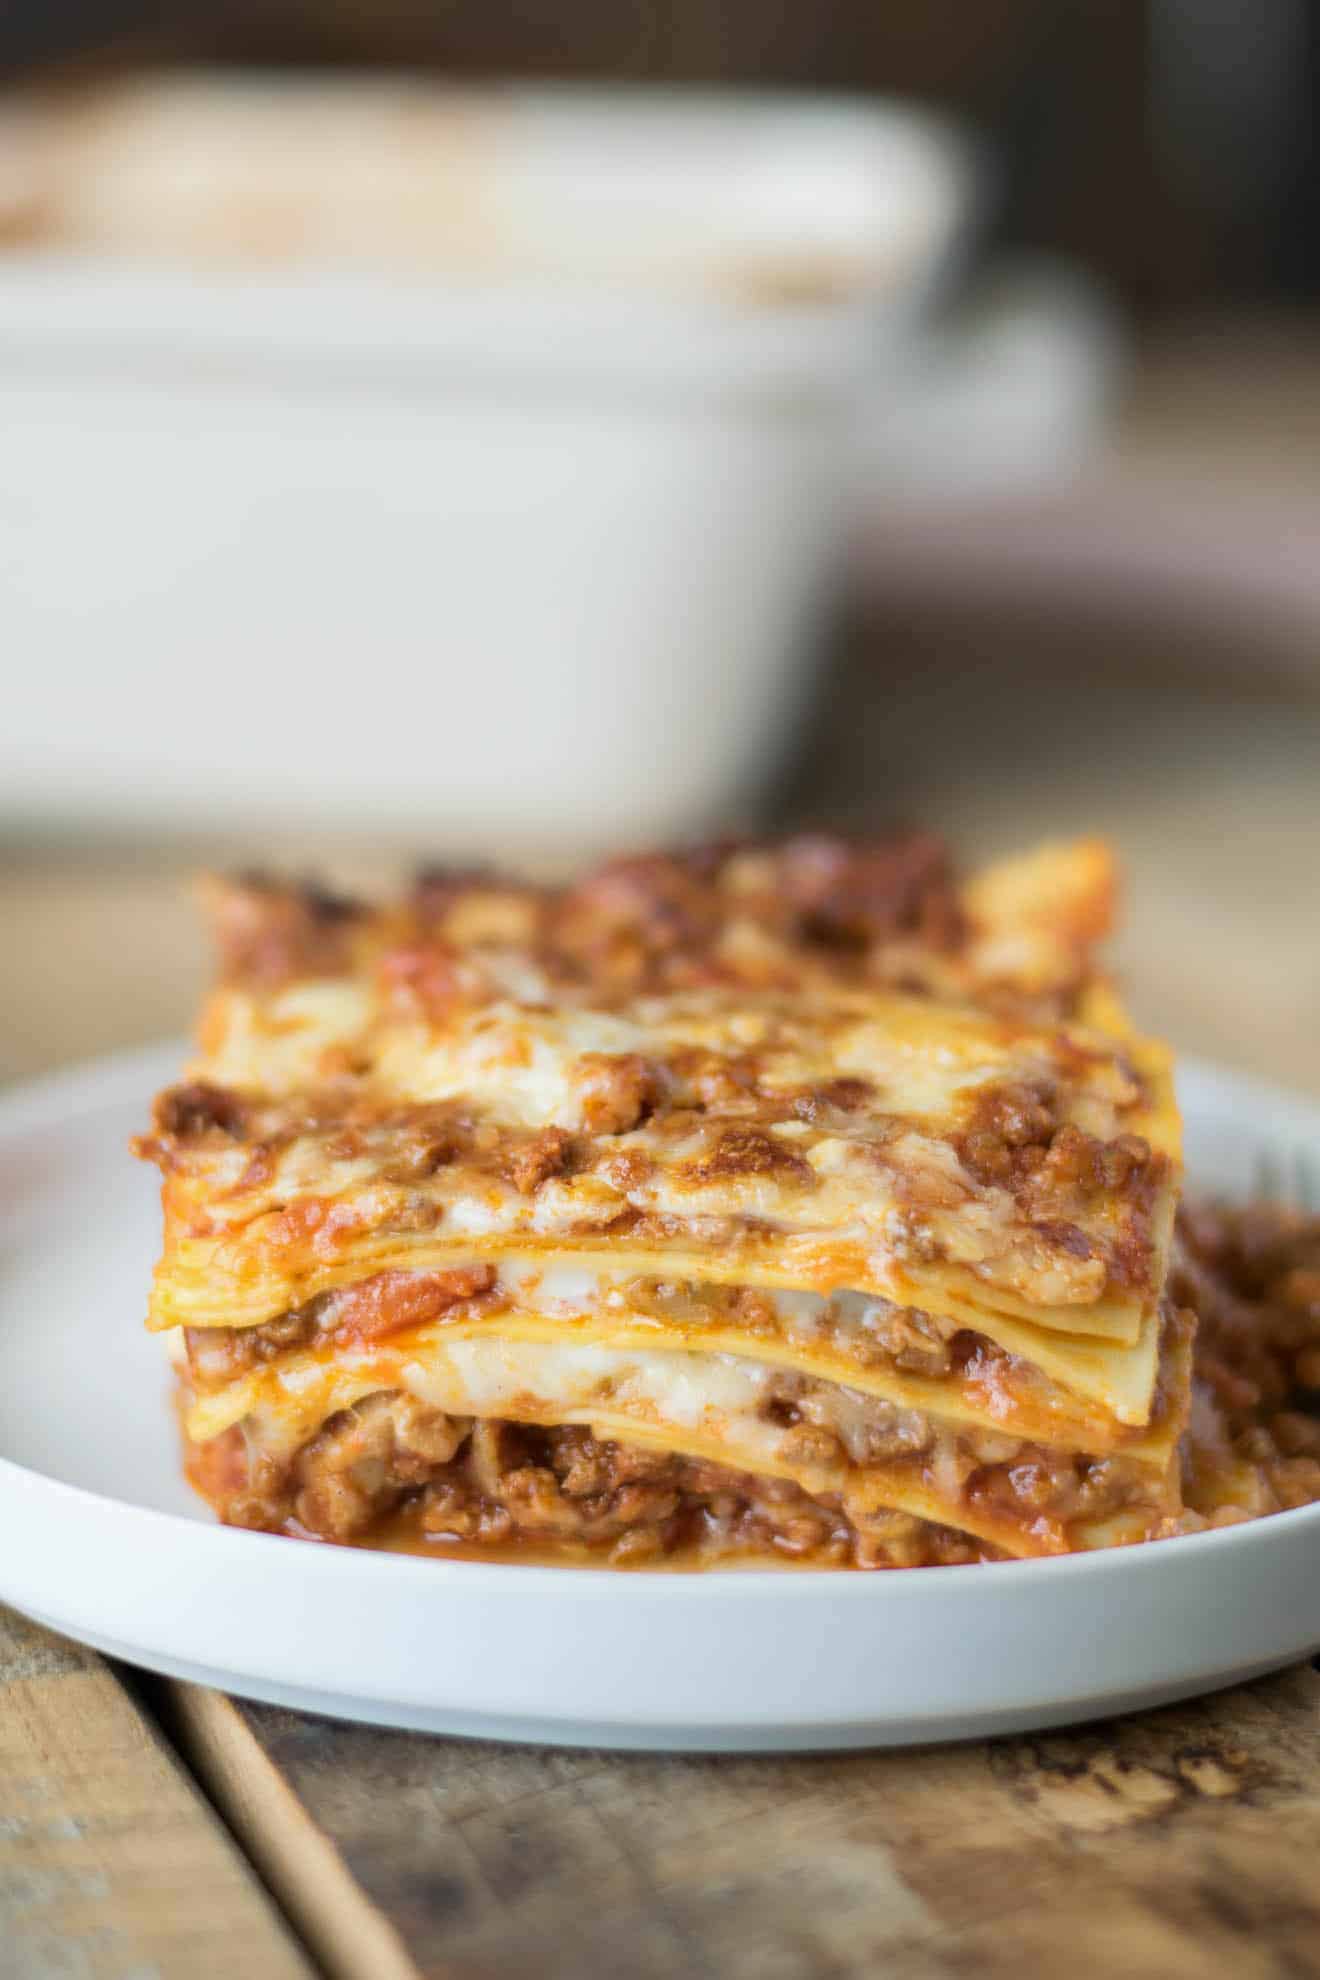 A closeup of a slice of lasagna showing the layers of pasta, meat sauce and cheese.